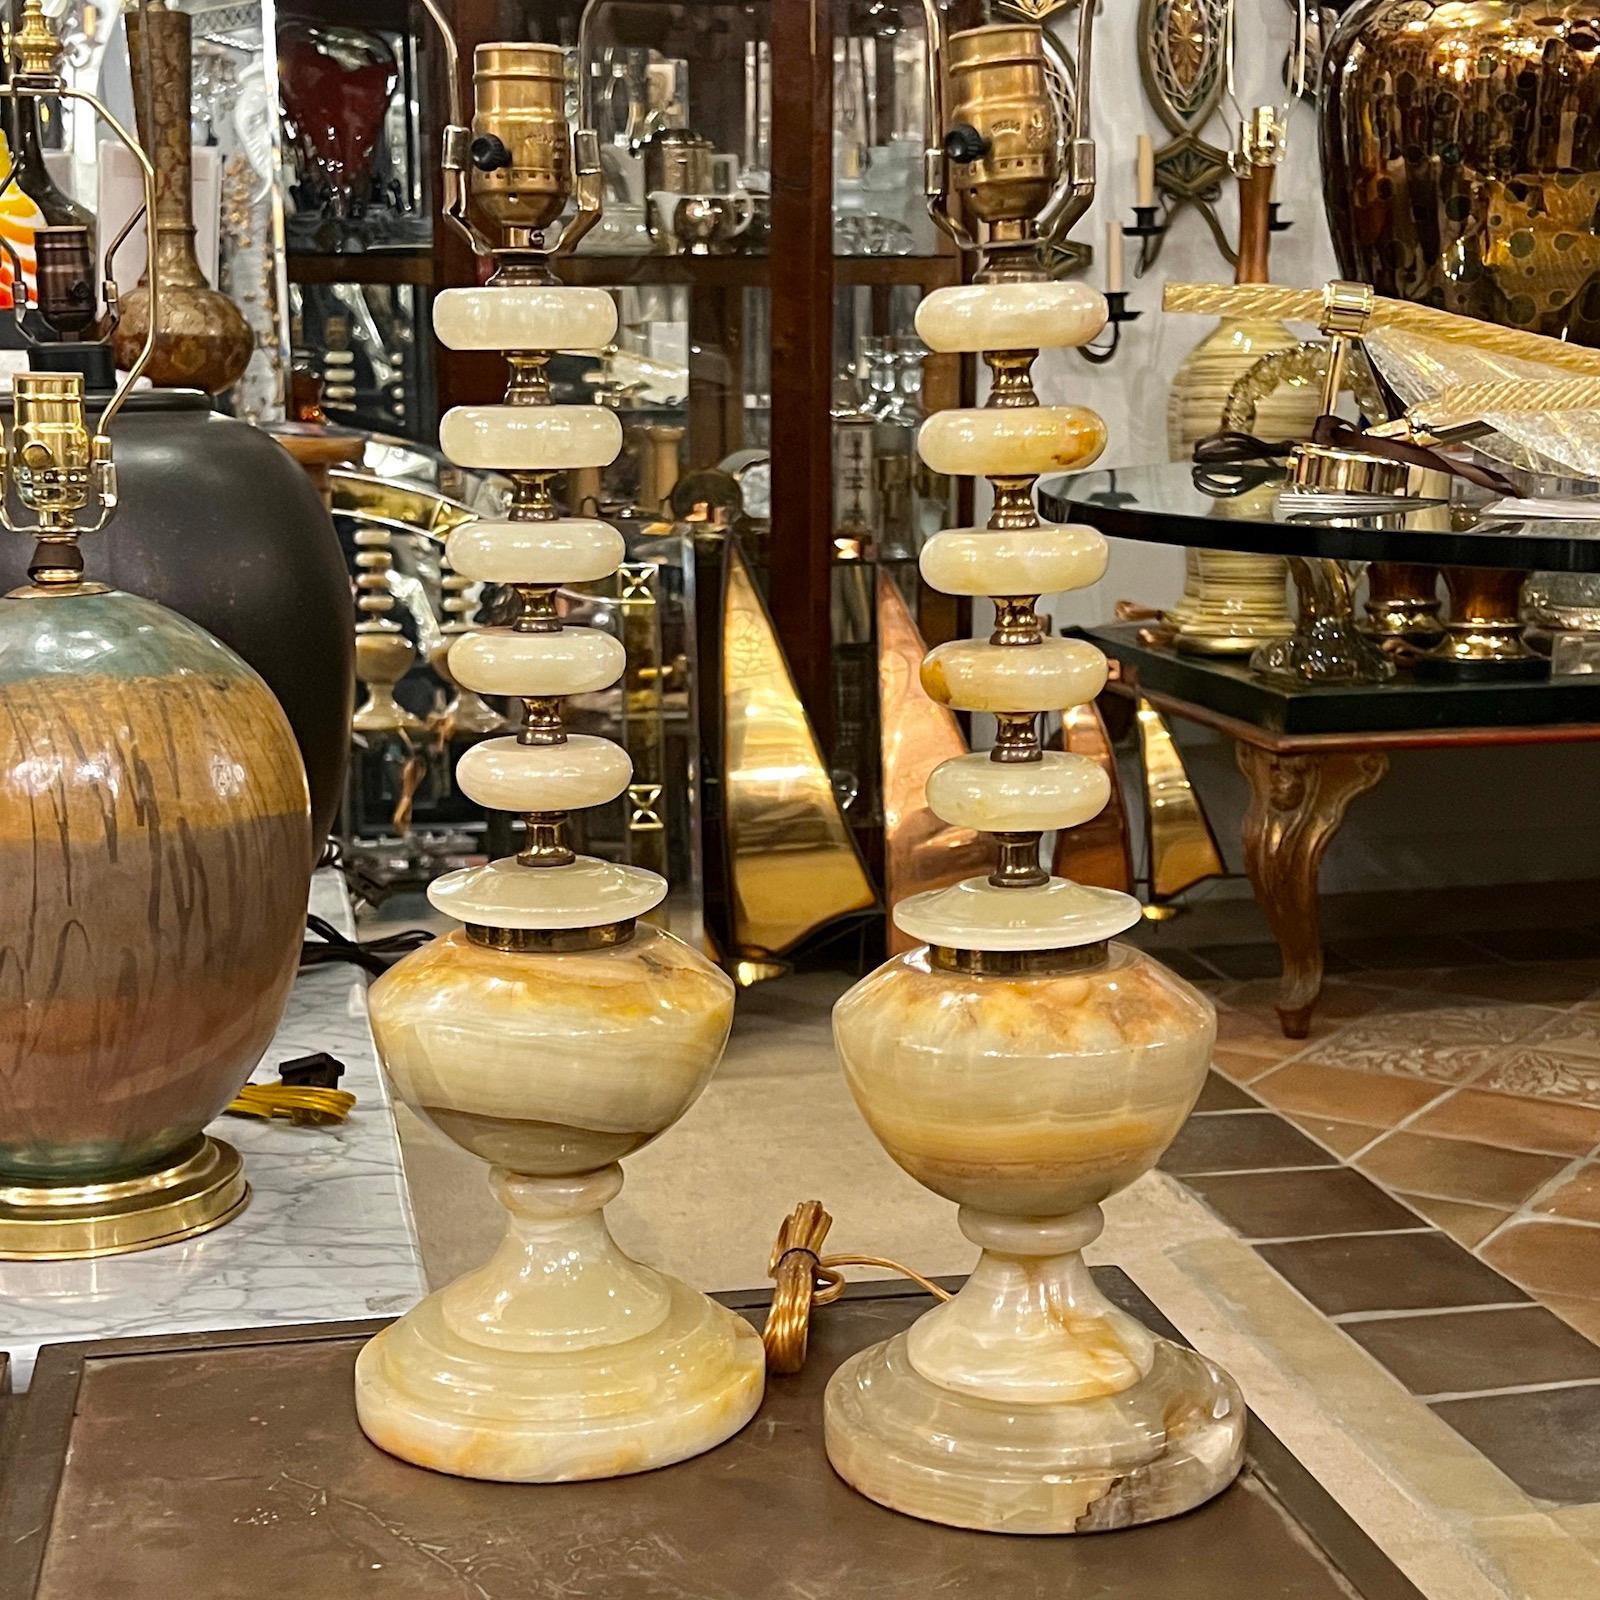 Pair of circa 1940's Italian onyx table lamps with brass elements.

Measurements:
Height of body: 17